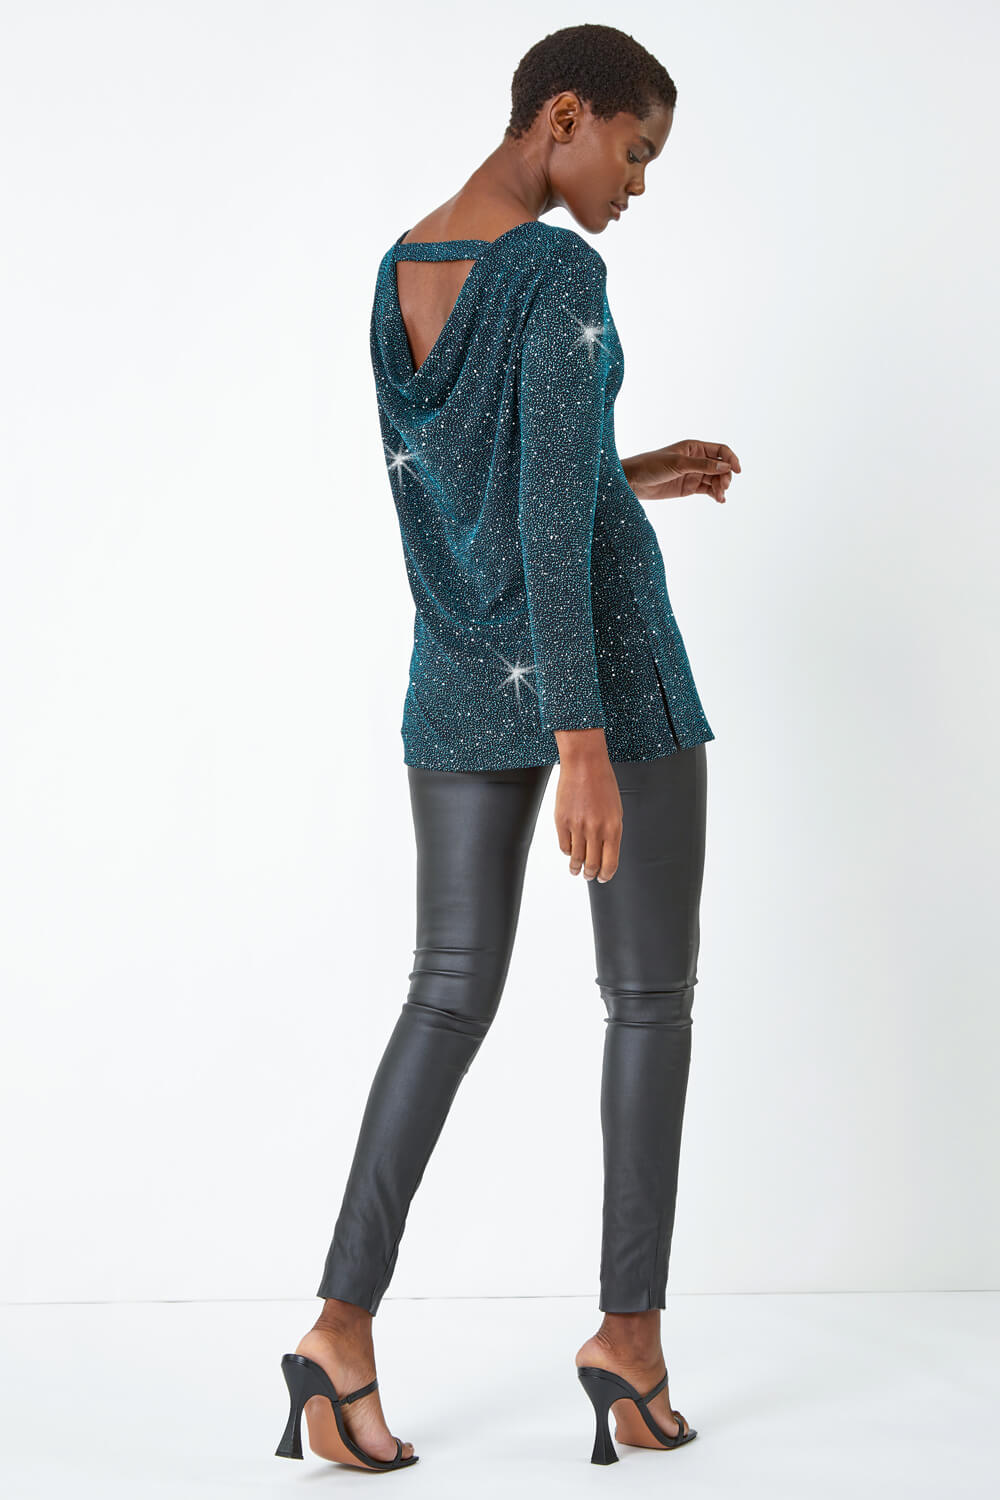 Teal Sparkle Cowl Back Detail Stretch Top, Image 3 of 5